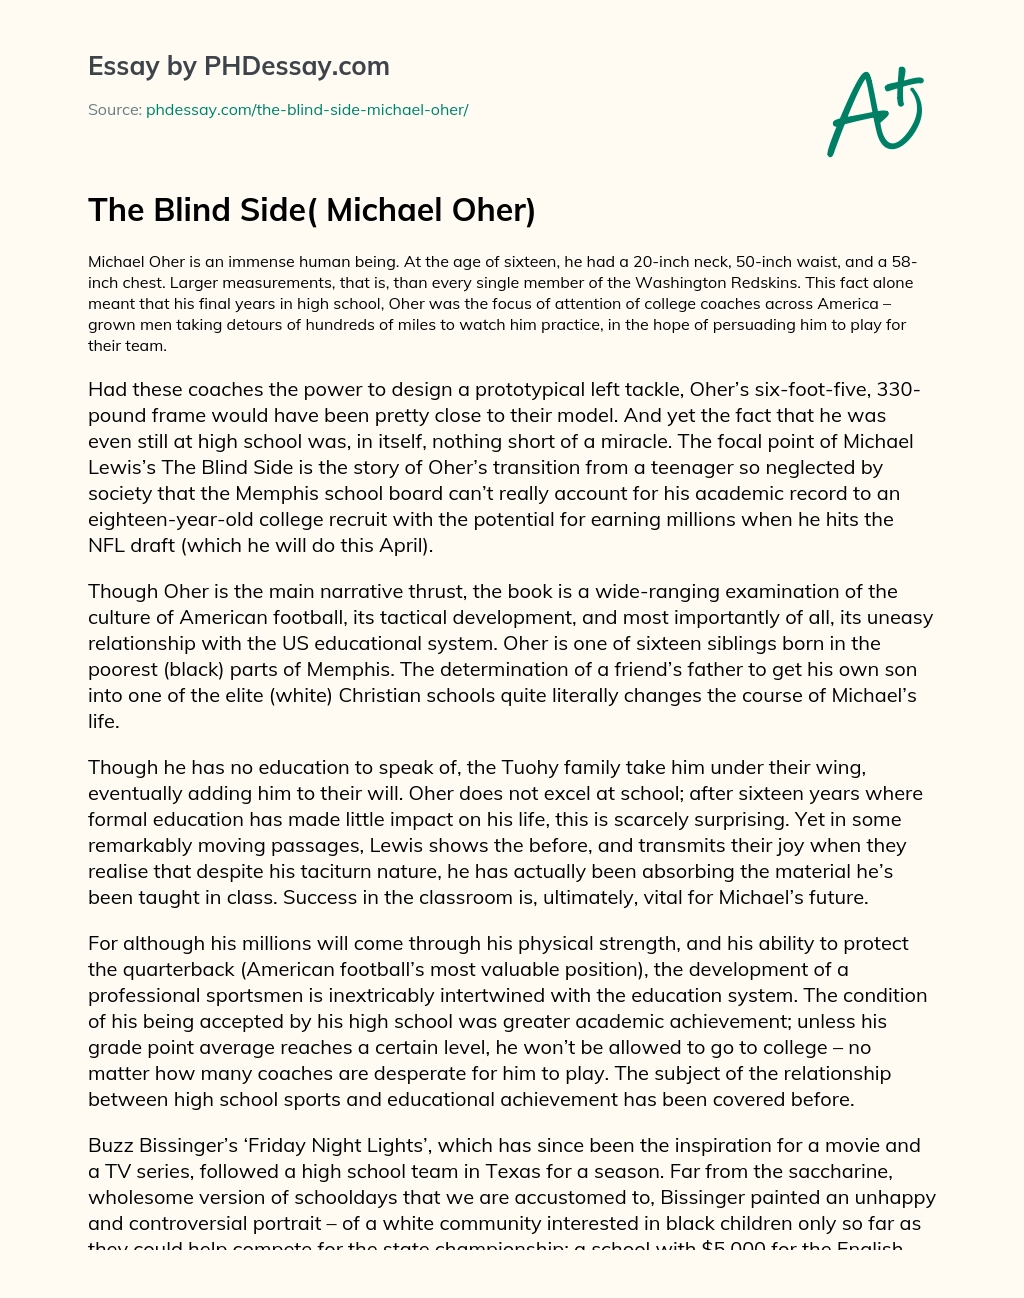 The Blind Side( Michael Oher) essay